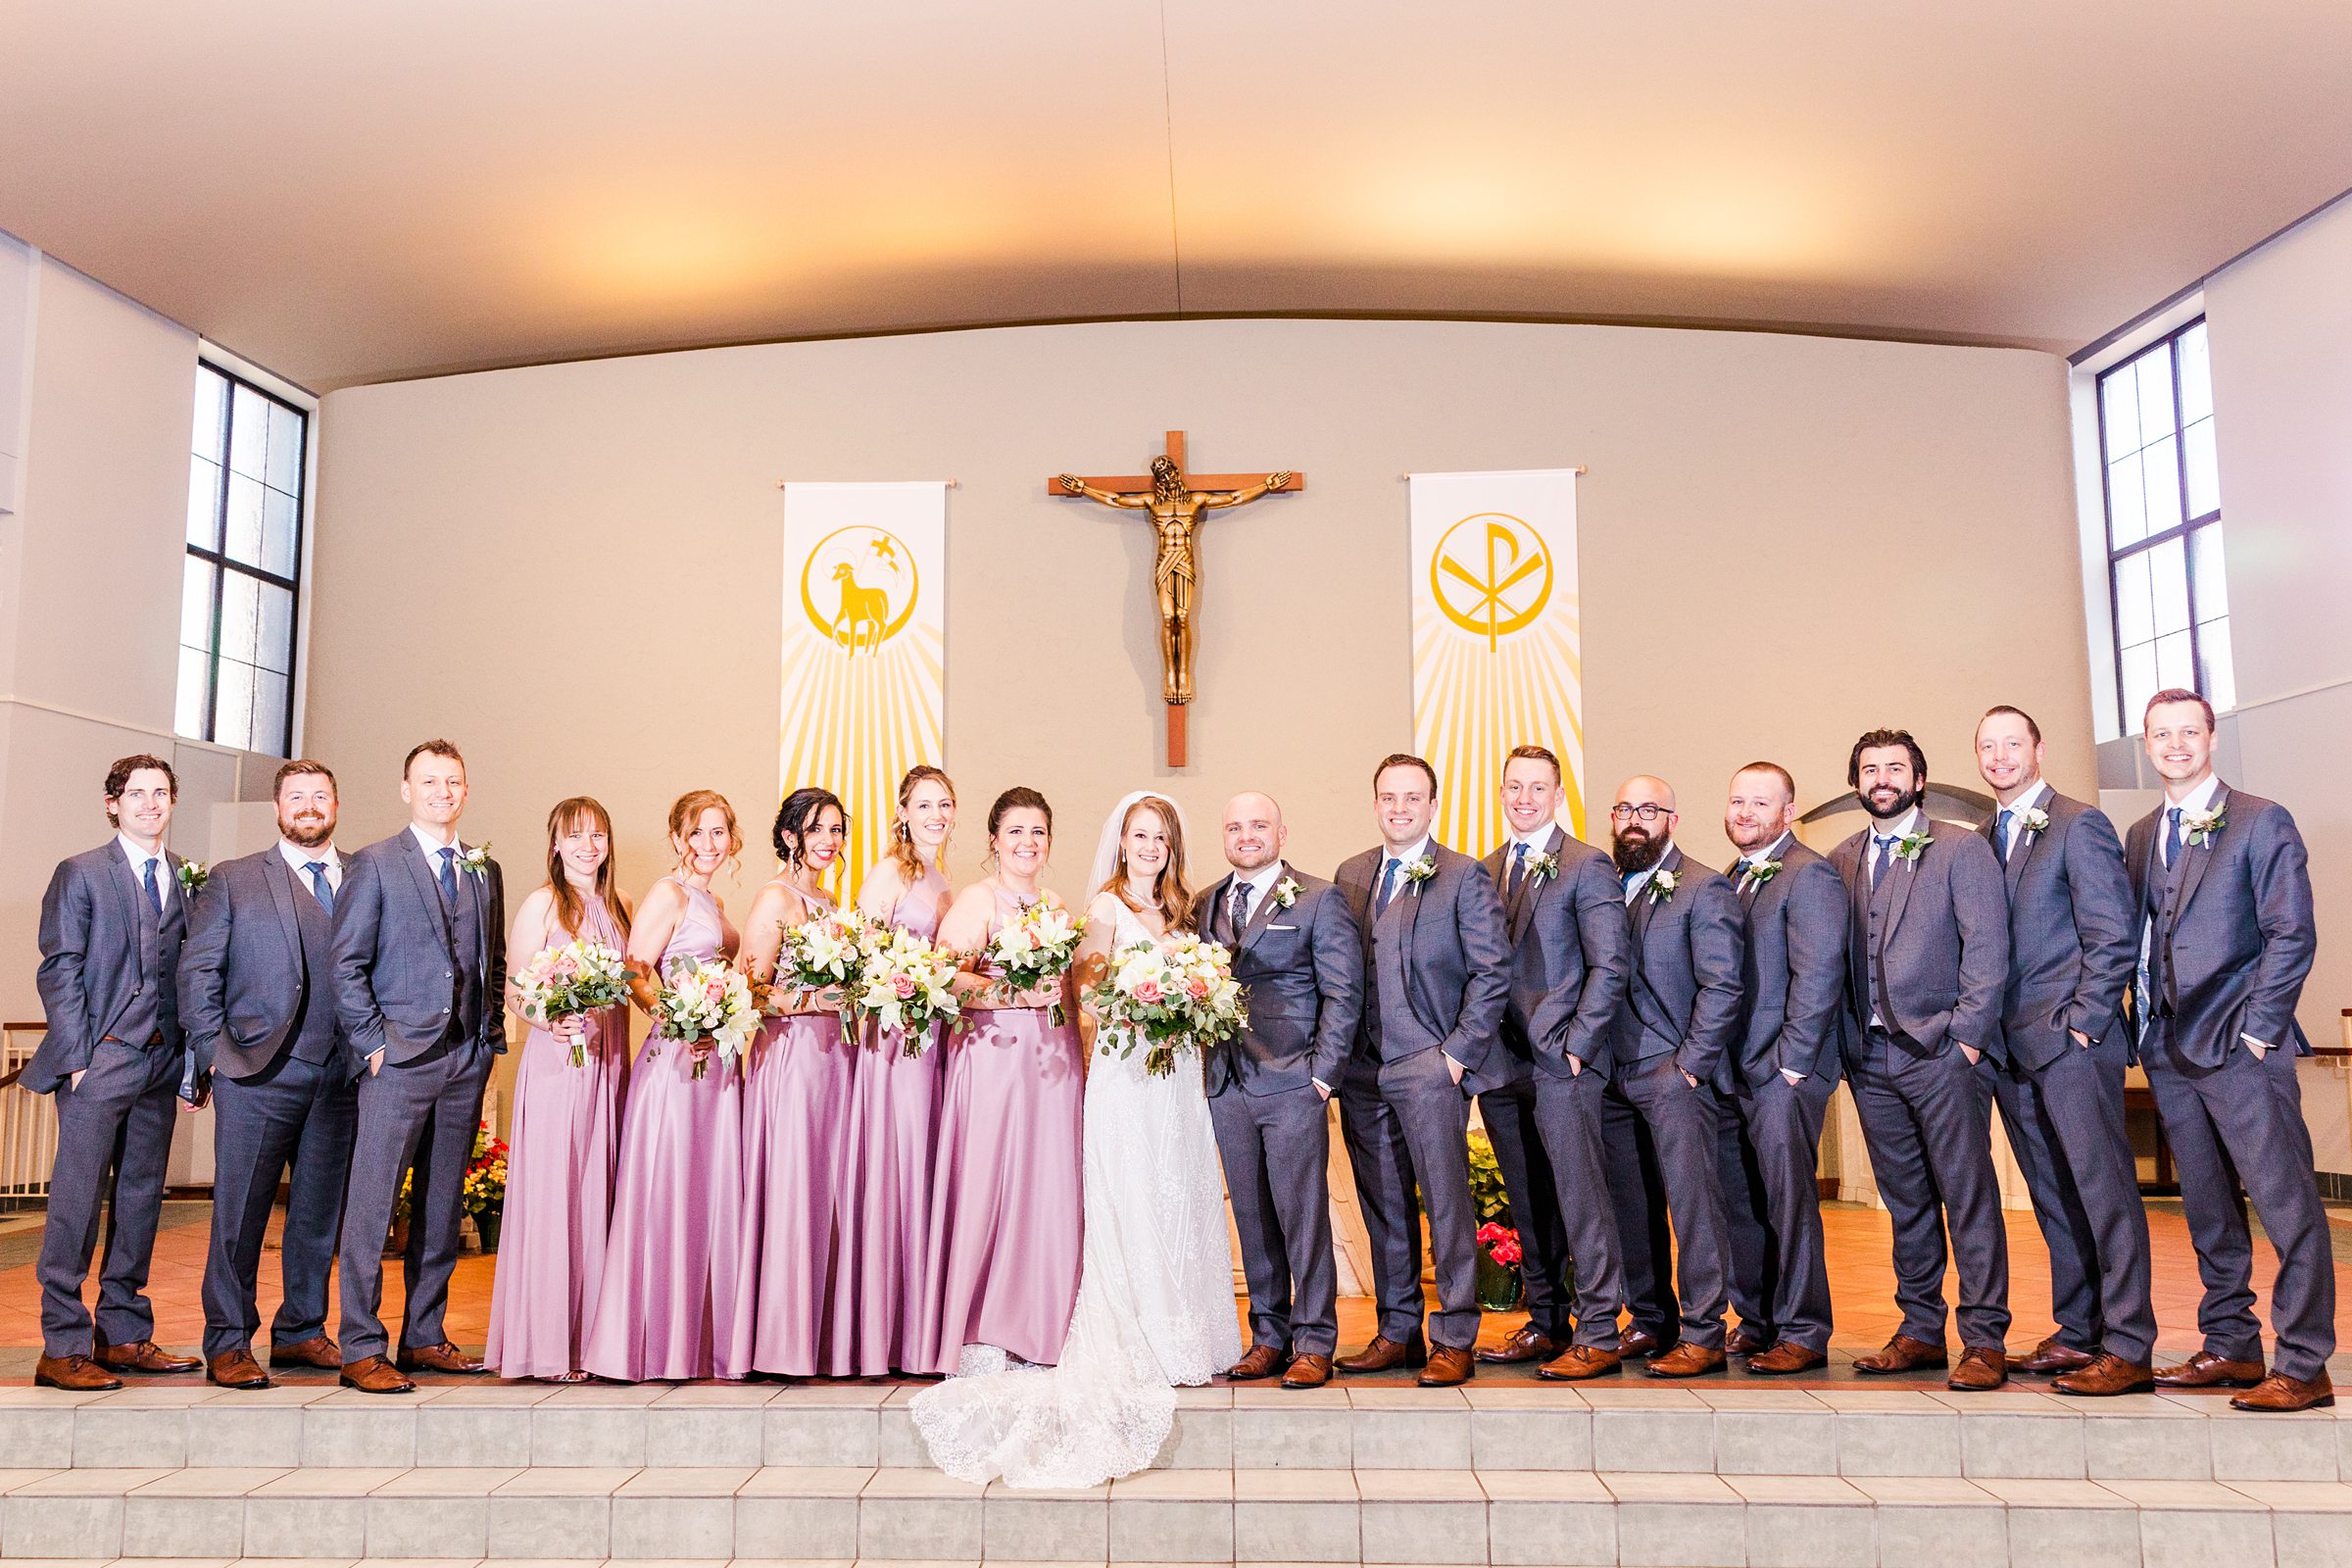 Bridal Party during a wedding in Naperville, Illinois, Photo Taken by Austin Wedding Photographers, Joanna & Brett Photography